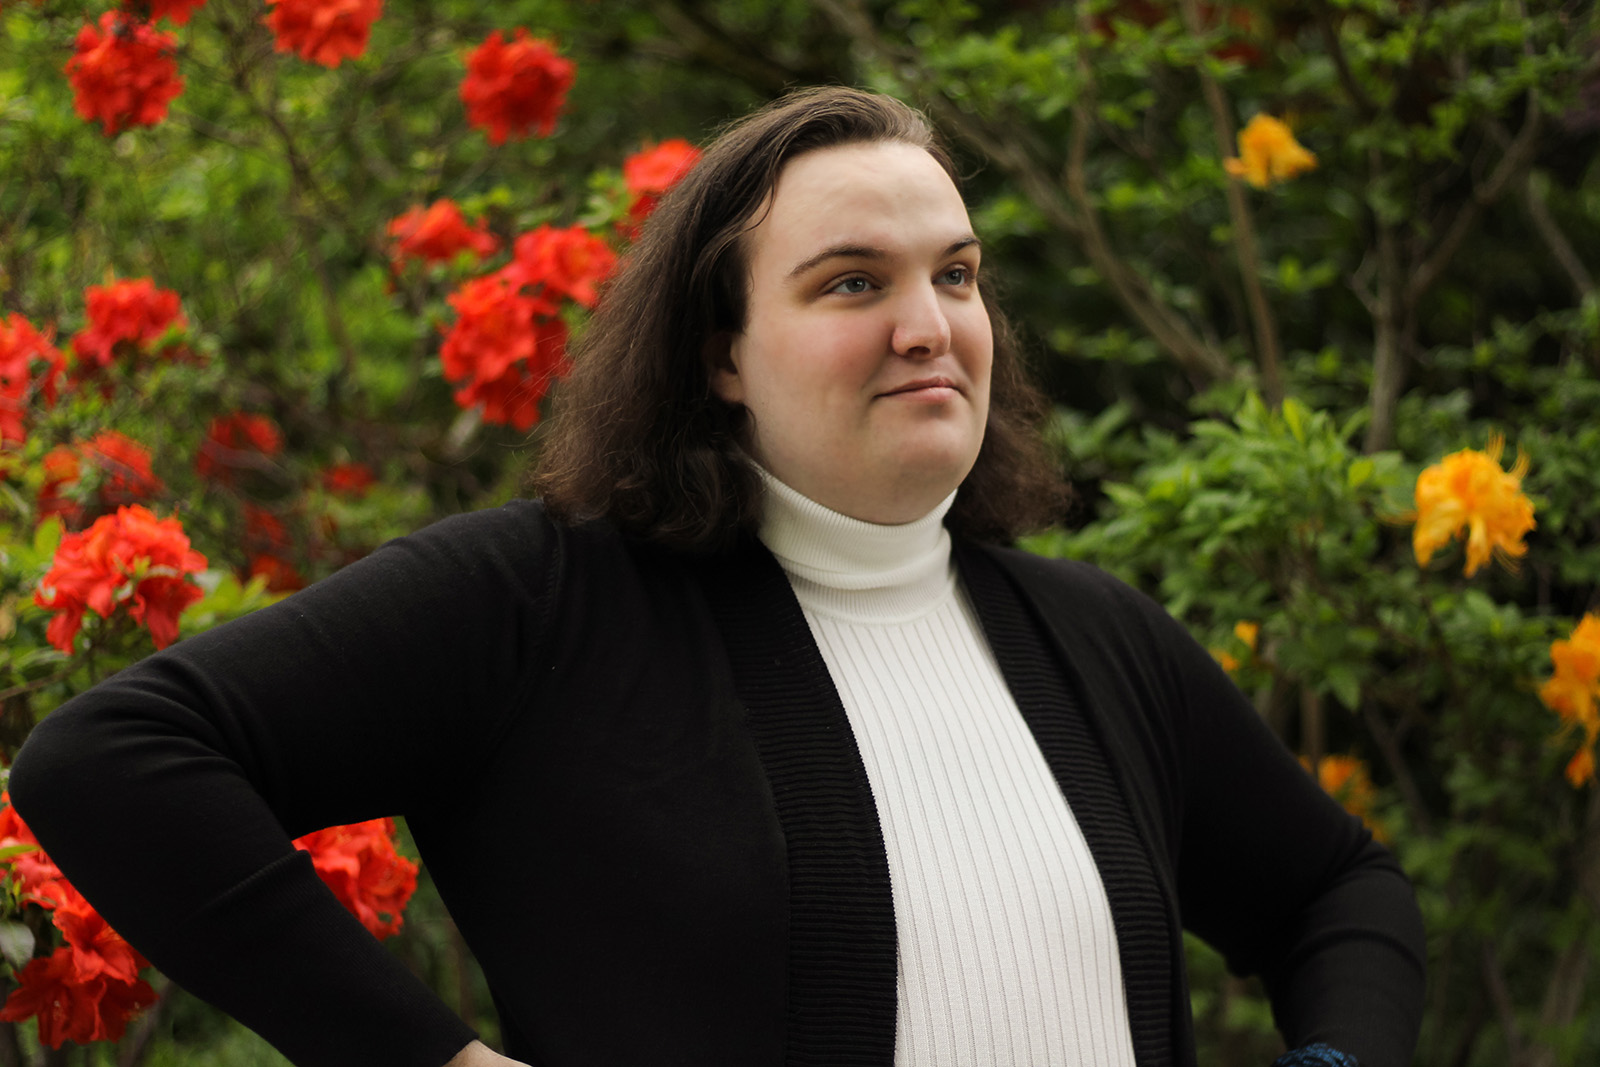 a person in a white turtleneck and black blazer stands in front of flowering shrubs